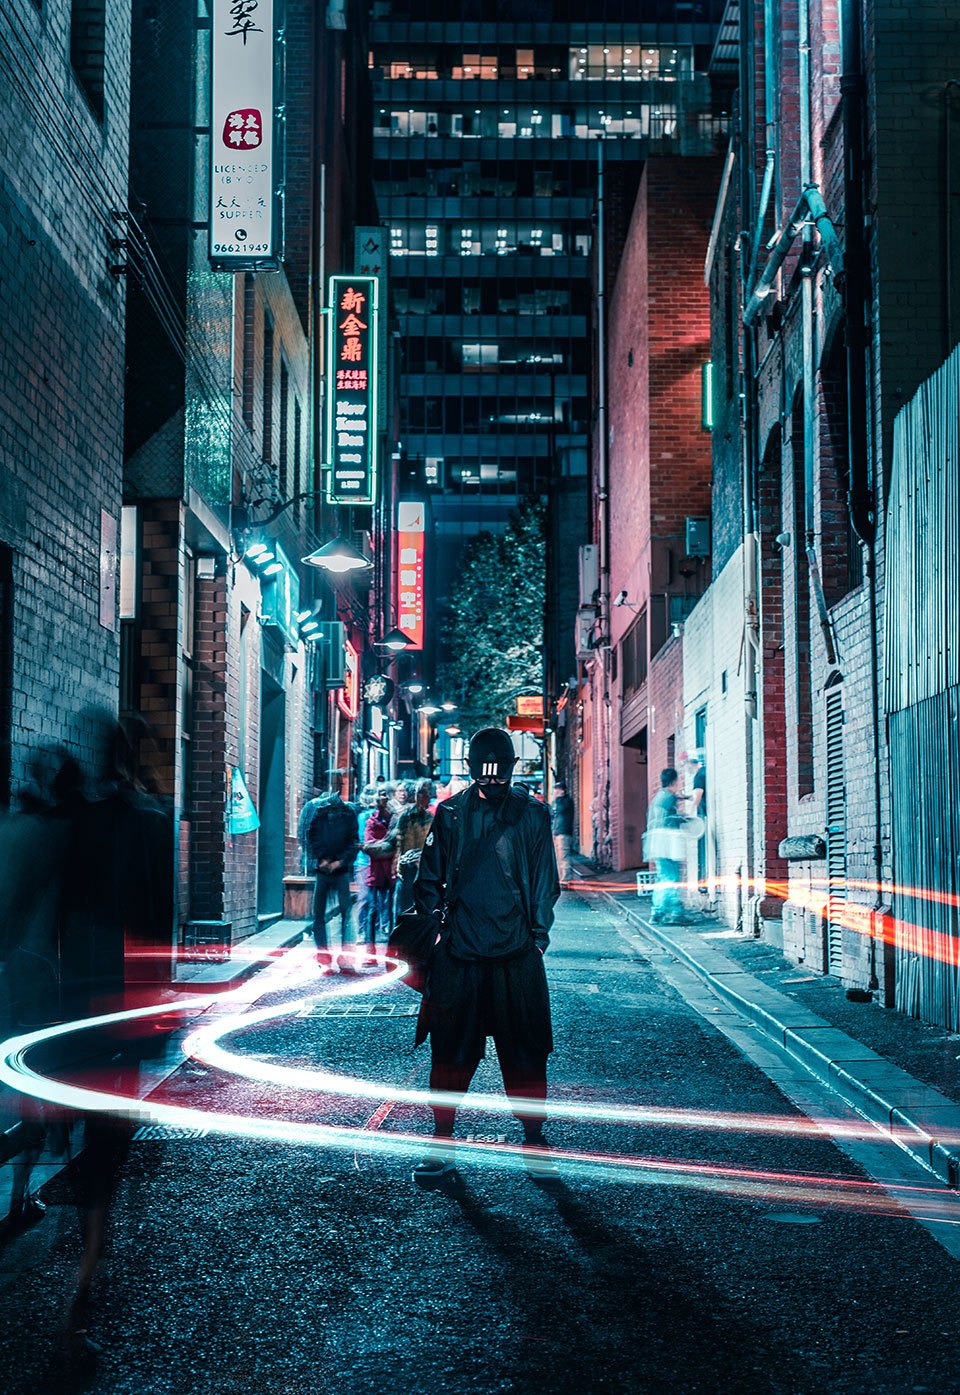 Lost in the city 1